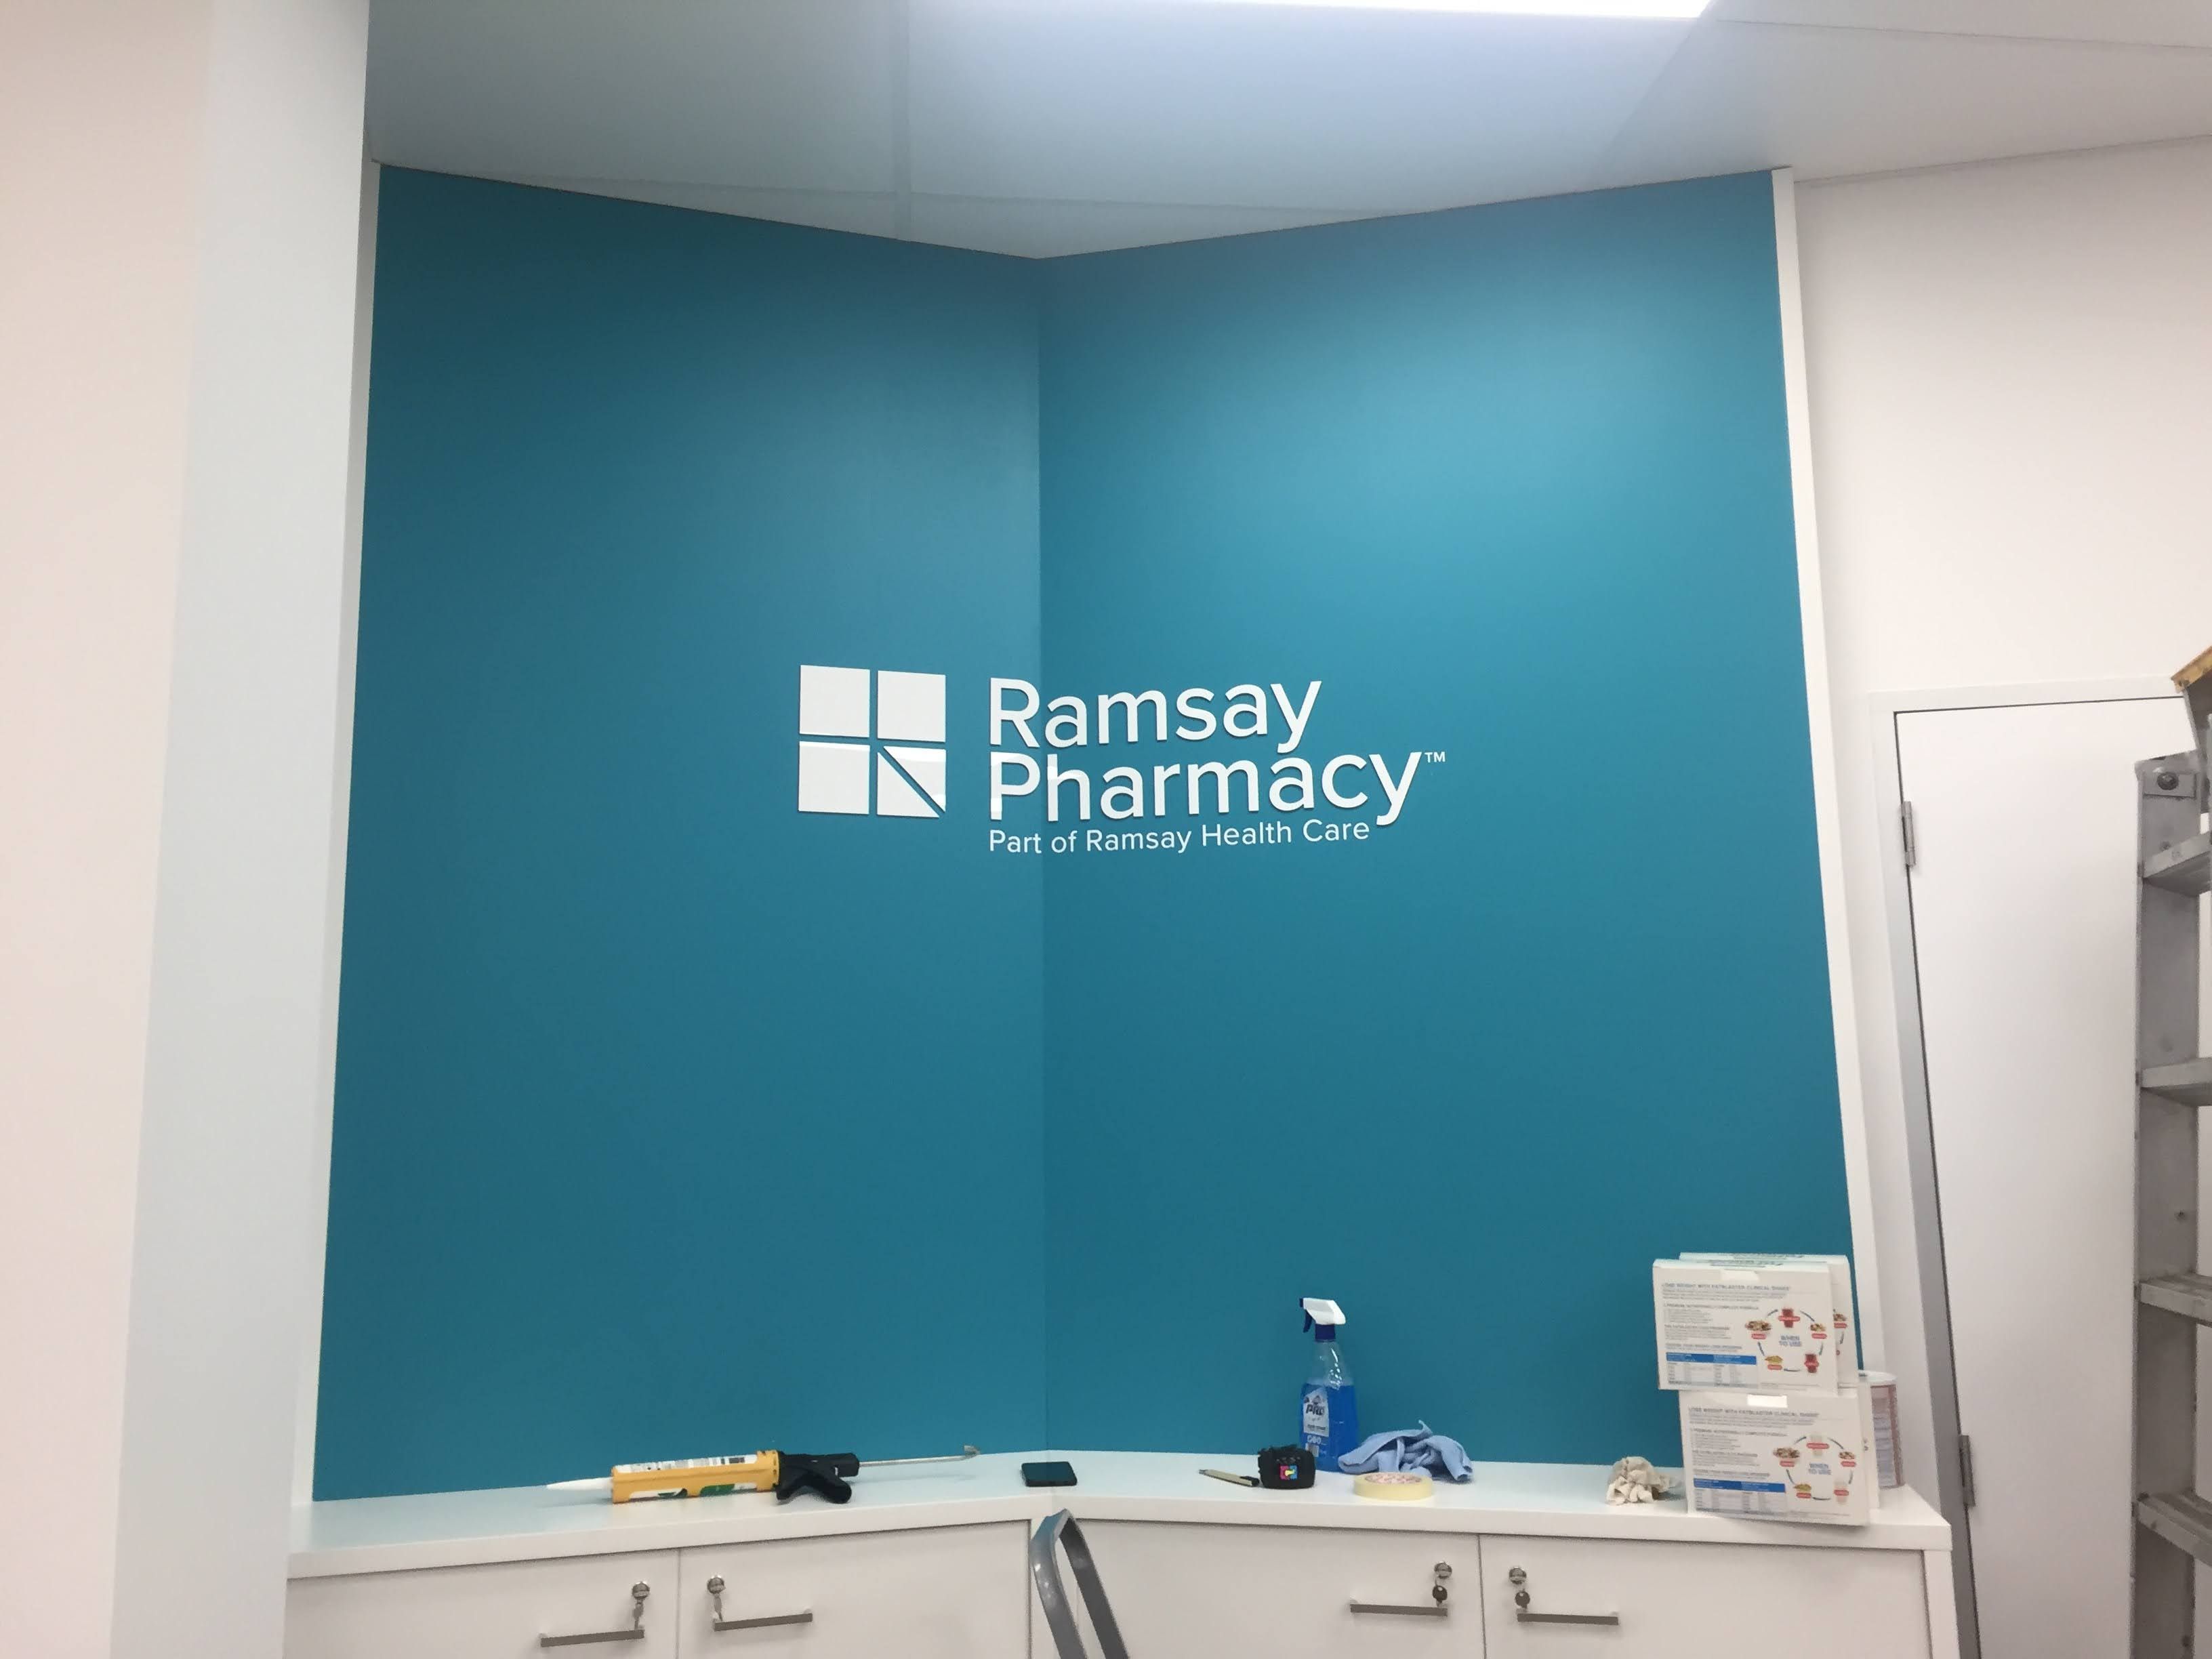 ramsay pharmacy fabricated letters